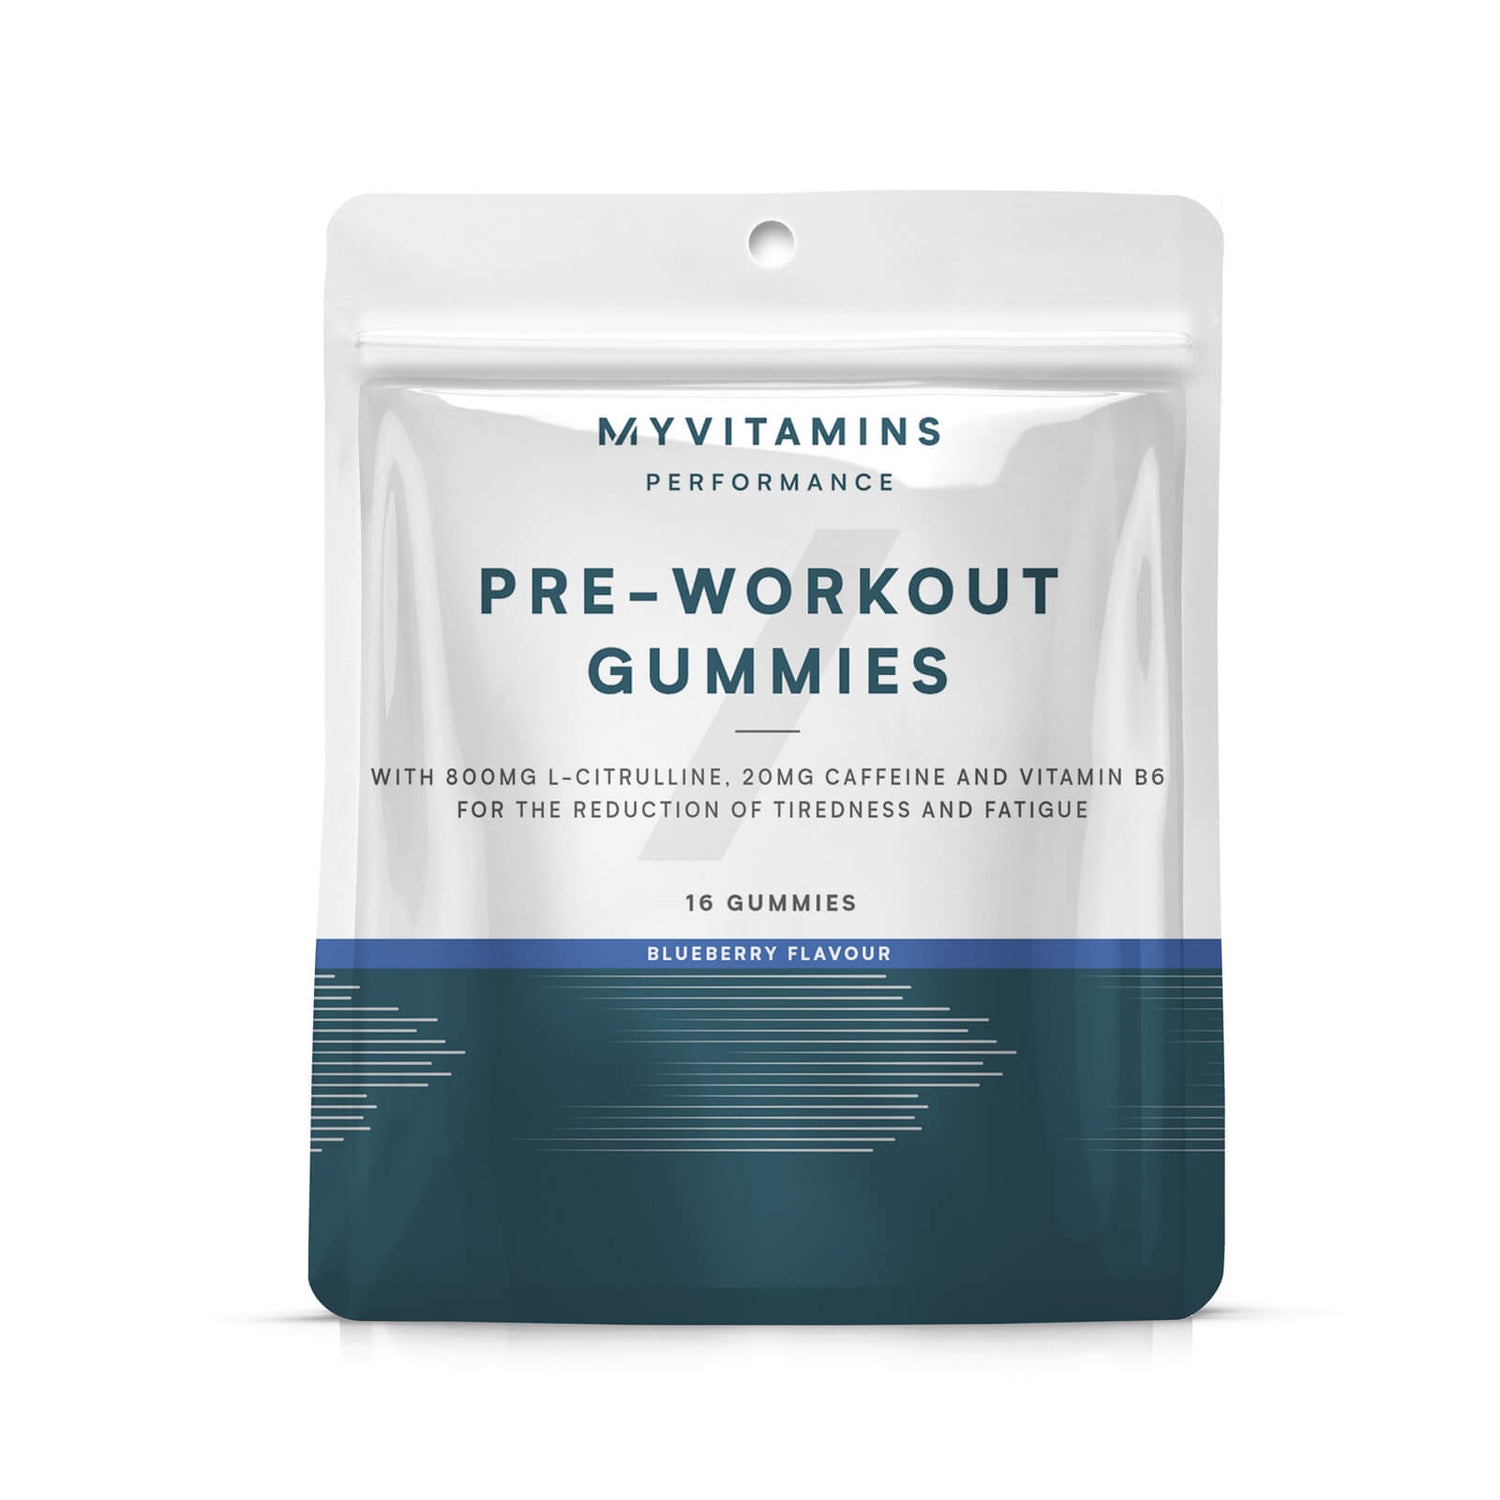 Pre-Workout Gummies Pouch - Sample Pouch - Blueberry